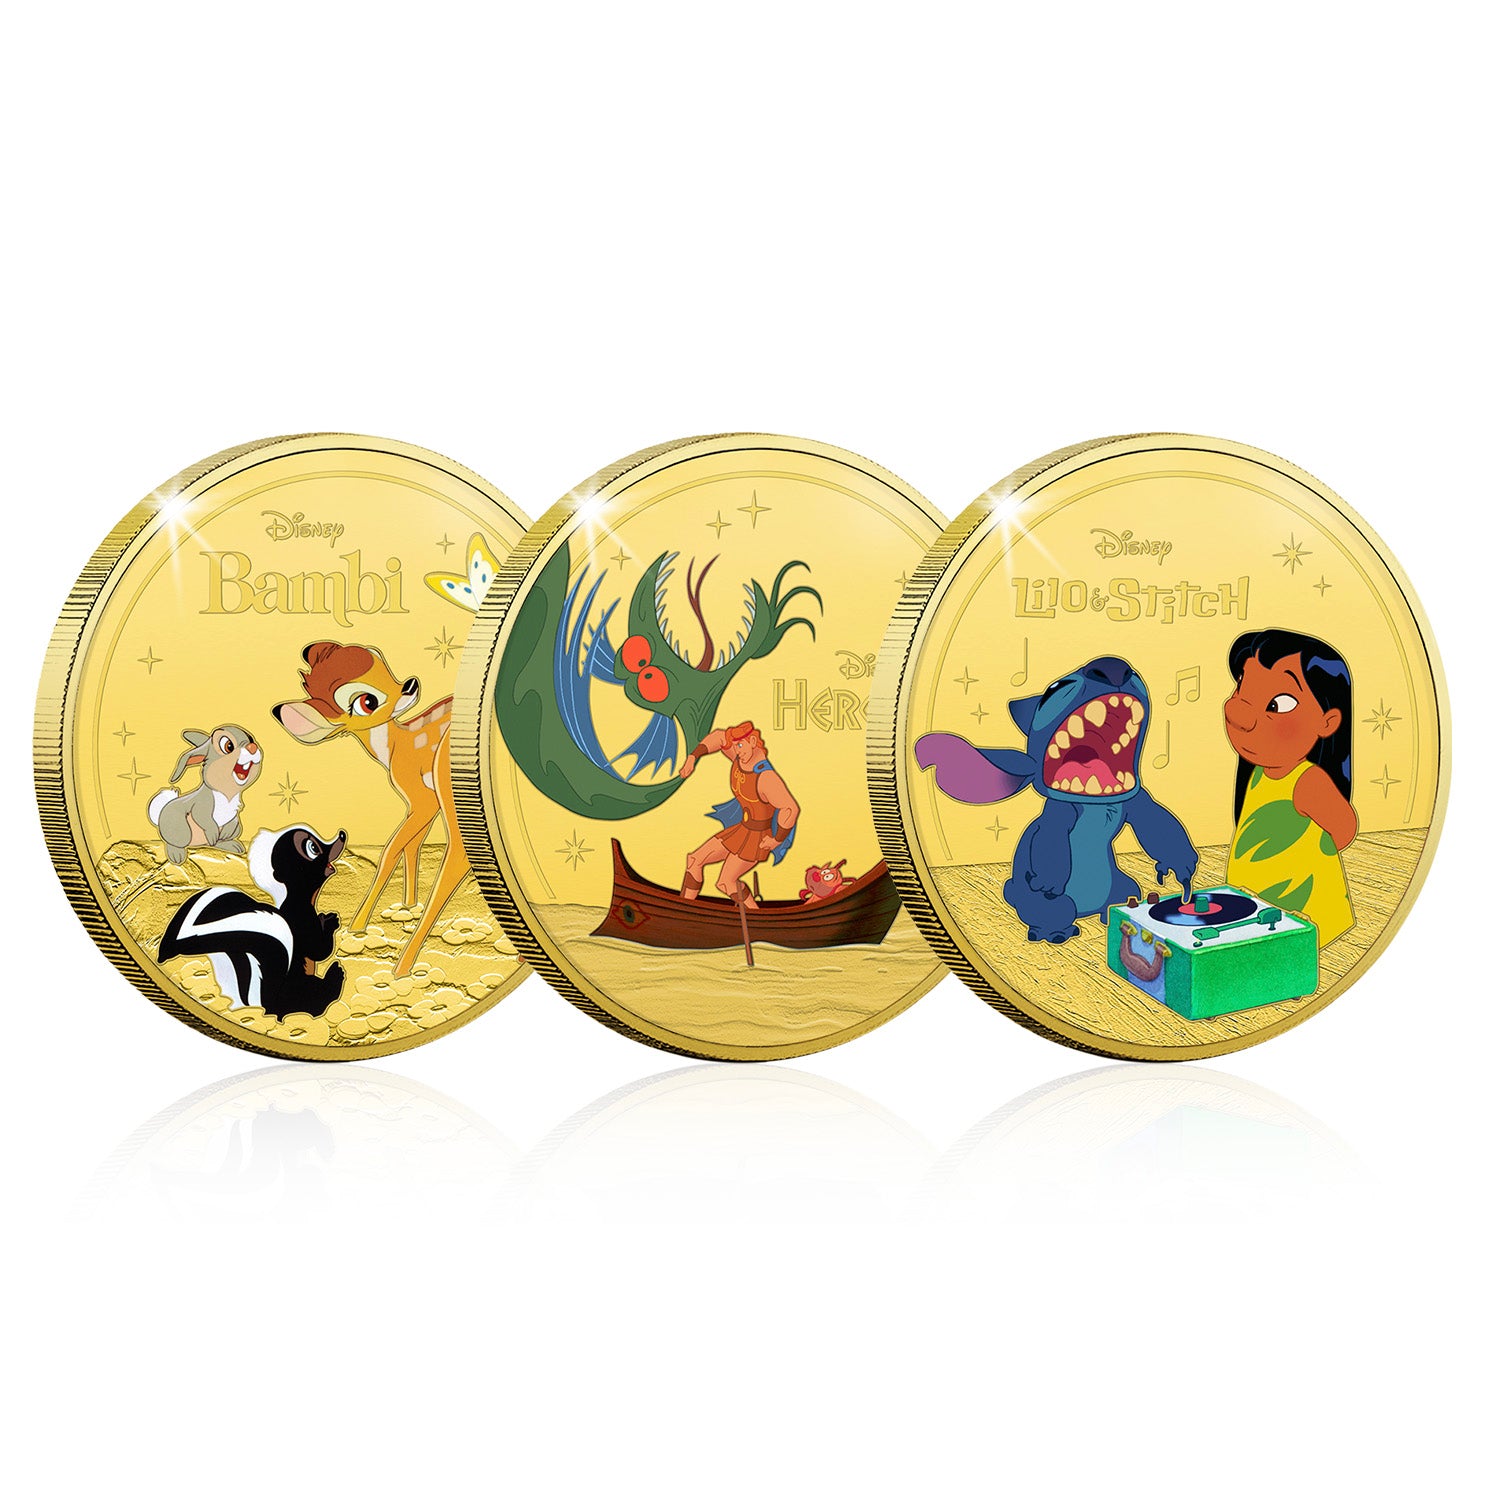 The Official Magic of Disney Complete Collection